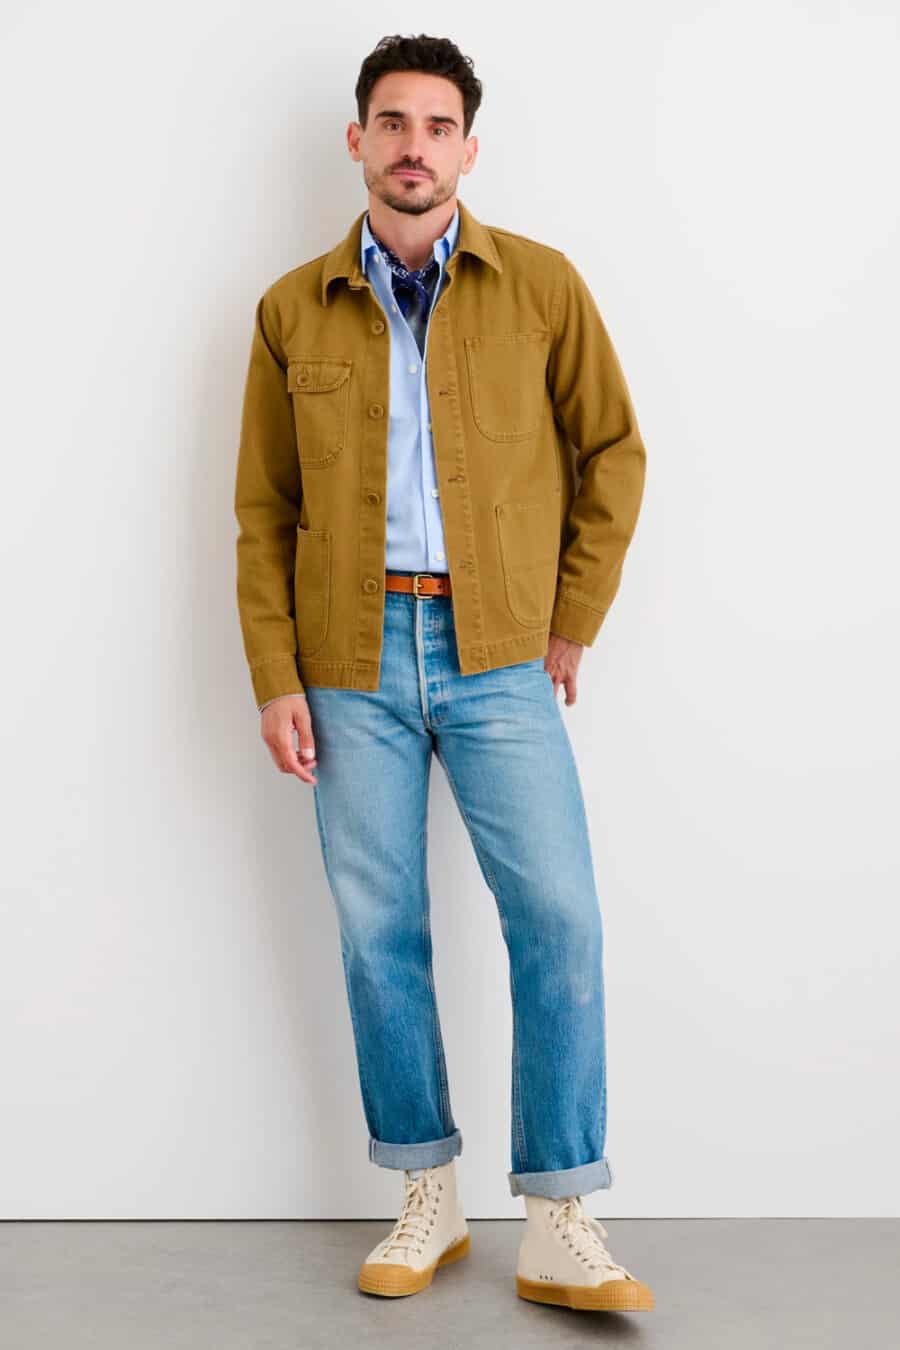 Men's light wash jeans, tucked in light blue shirt, tan cotton shacket and beige gumsole canvas high-top sneakers outfit